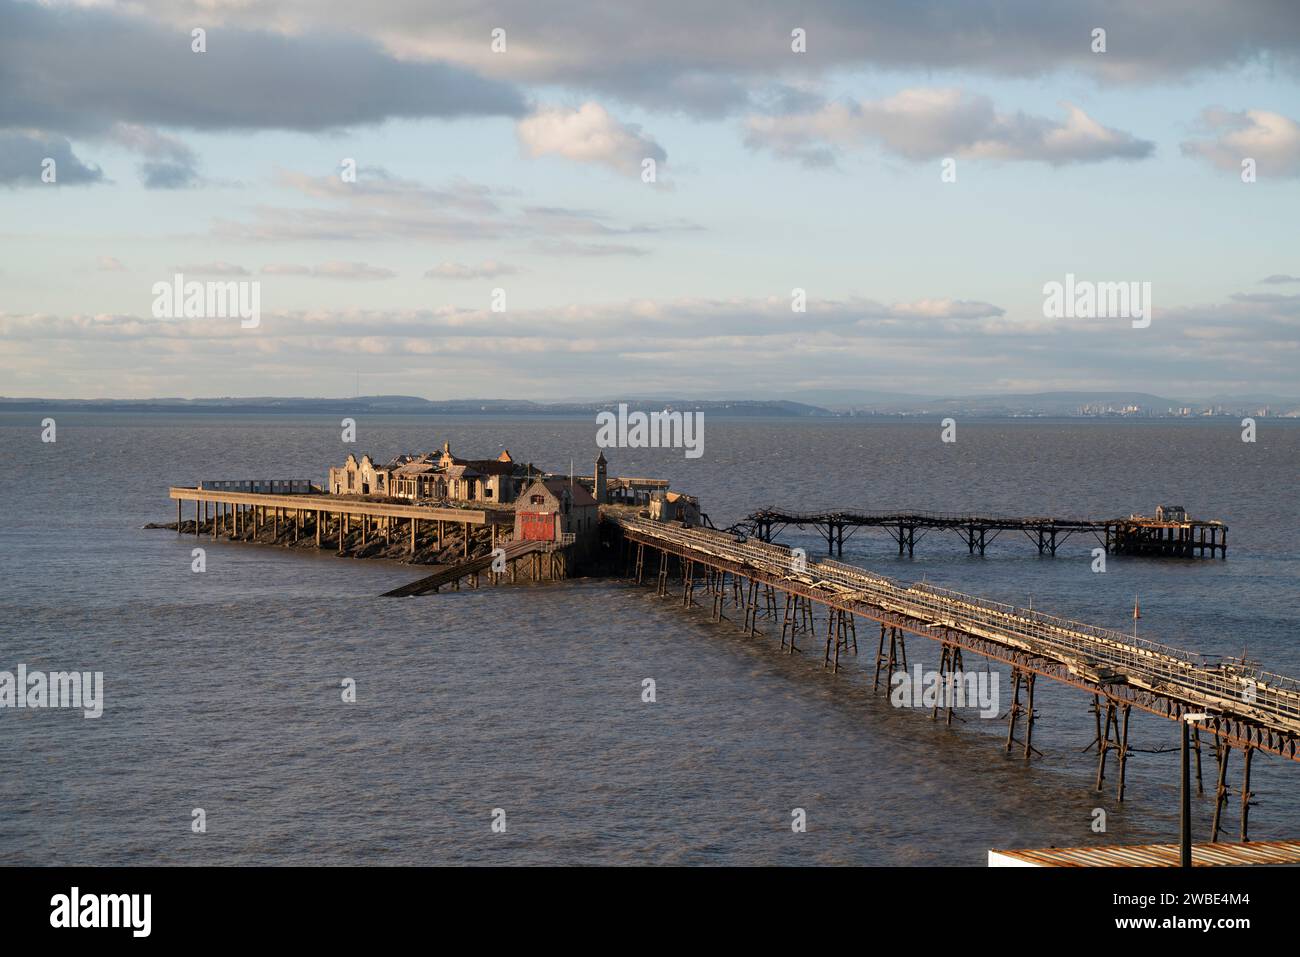 General view of Birnbeck Pier, located in the Bristol Channel at the north end of the Weston-super-Mare, North Somerset. The derelict pier joins the m Stock Photo